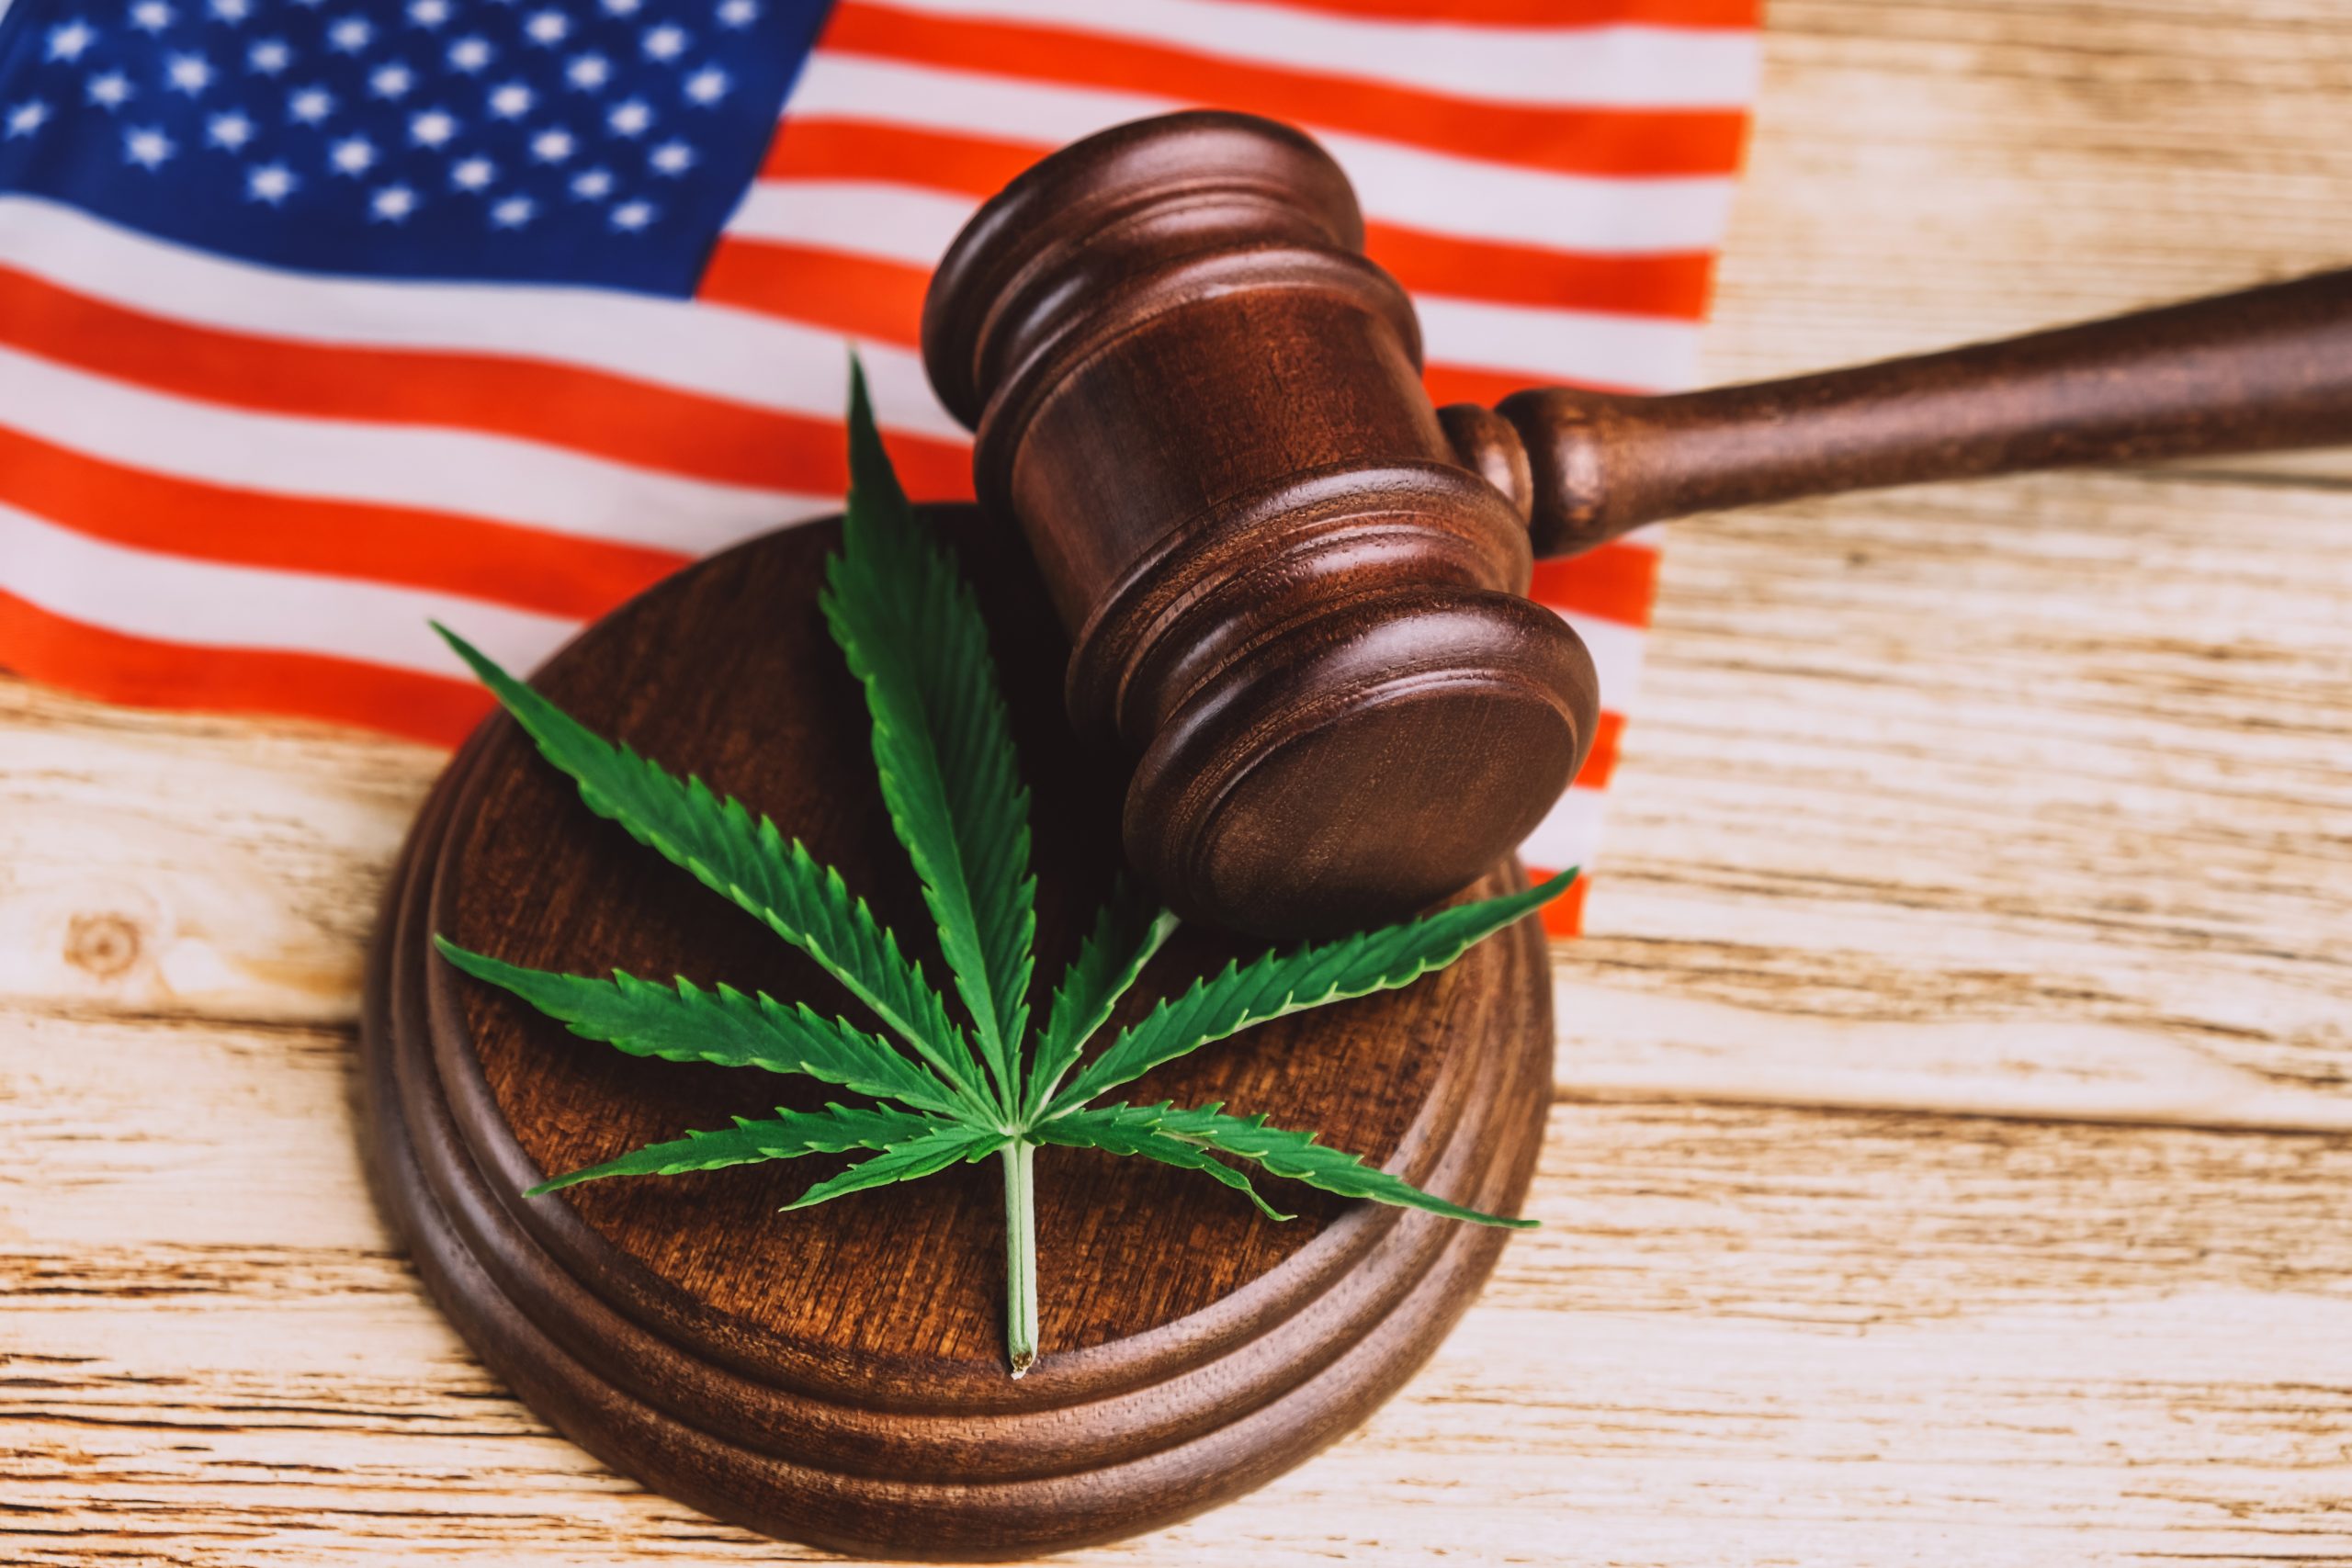 Cannabis leaf on sound block under gavel over US flag. High angle view of green fresh cannabis leaf lying down on sound block under gavel over USA flag on wooden table.